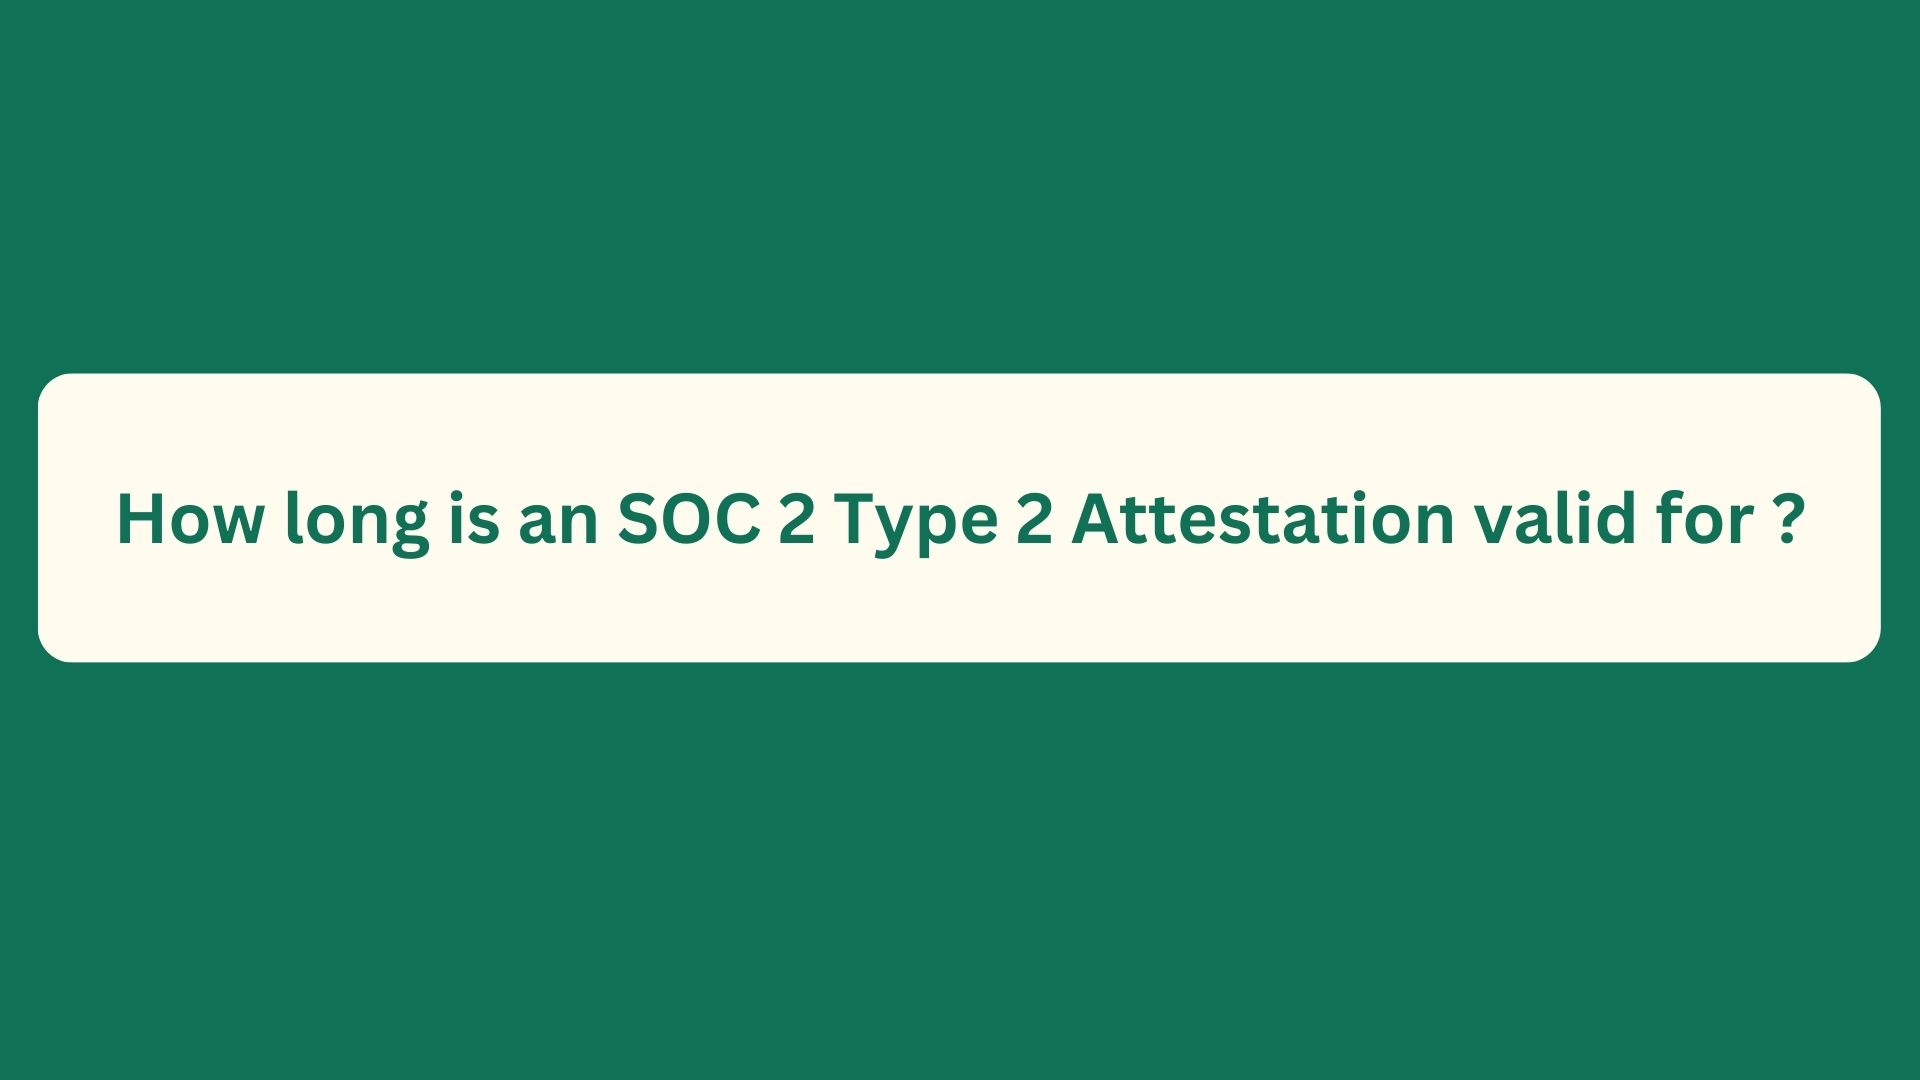 How long is an SOC 2 Type 2 Attestation valid for